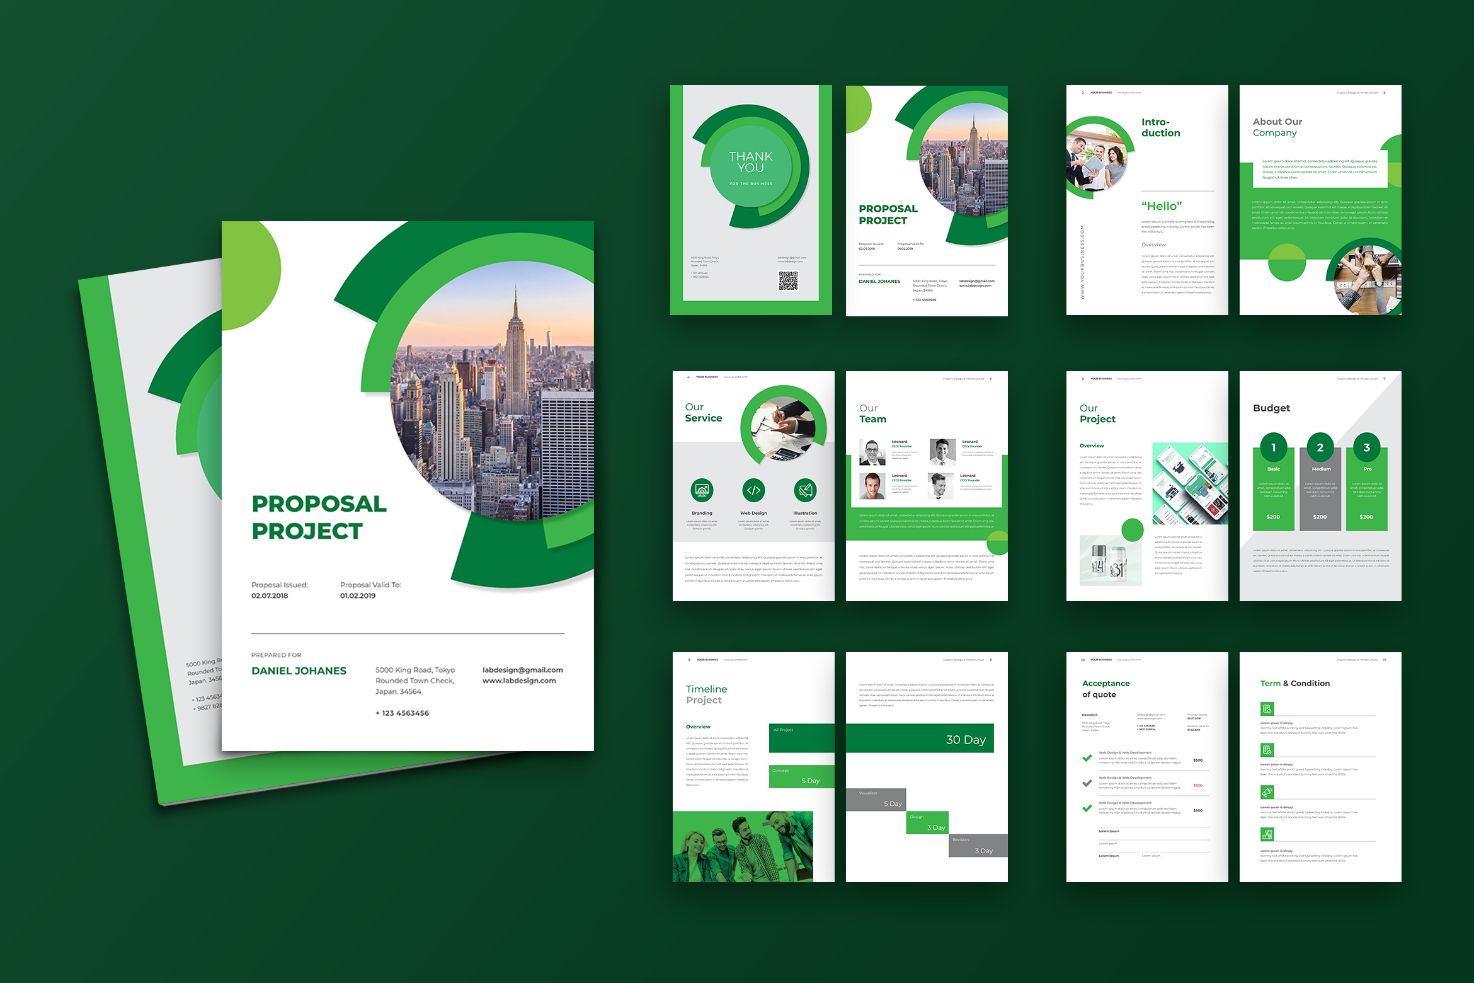 Proposal Website Design Services -Green and White Creative Template